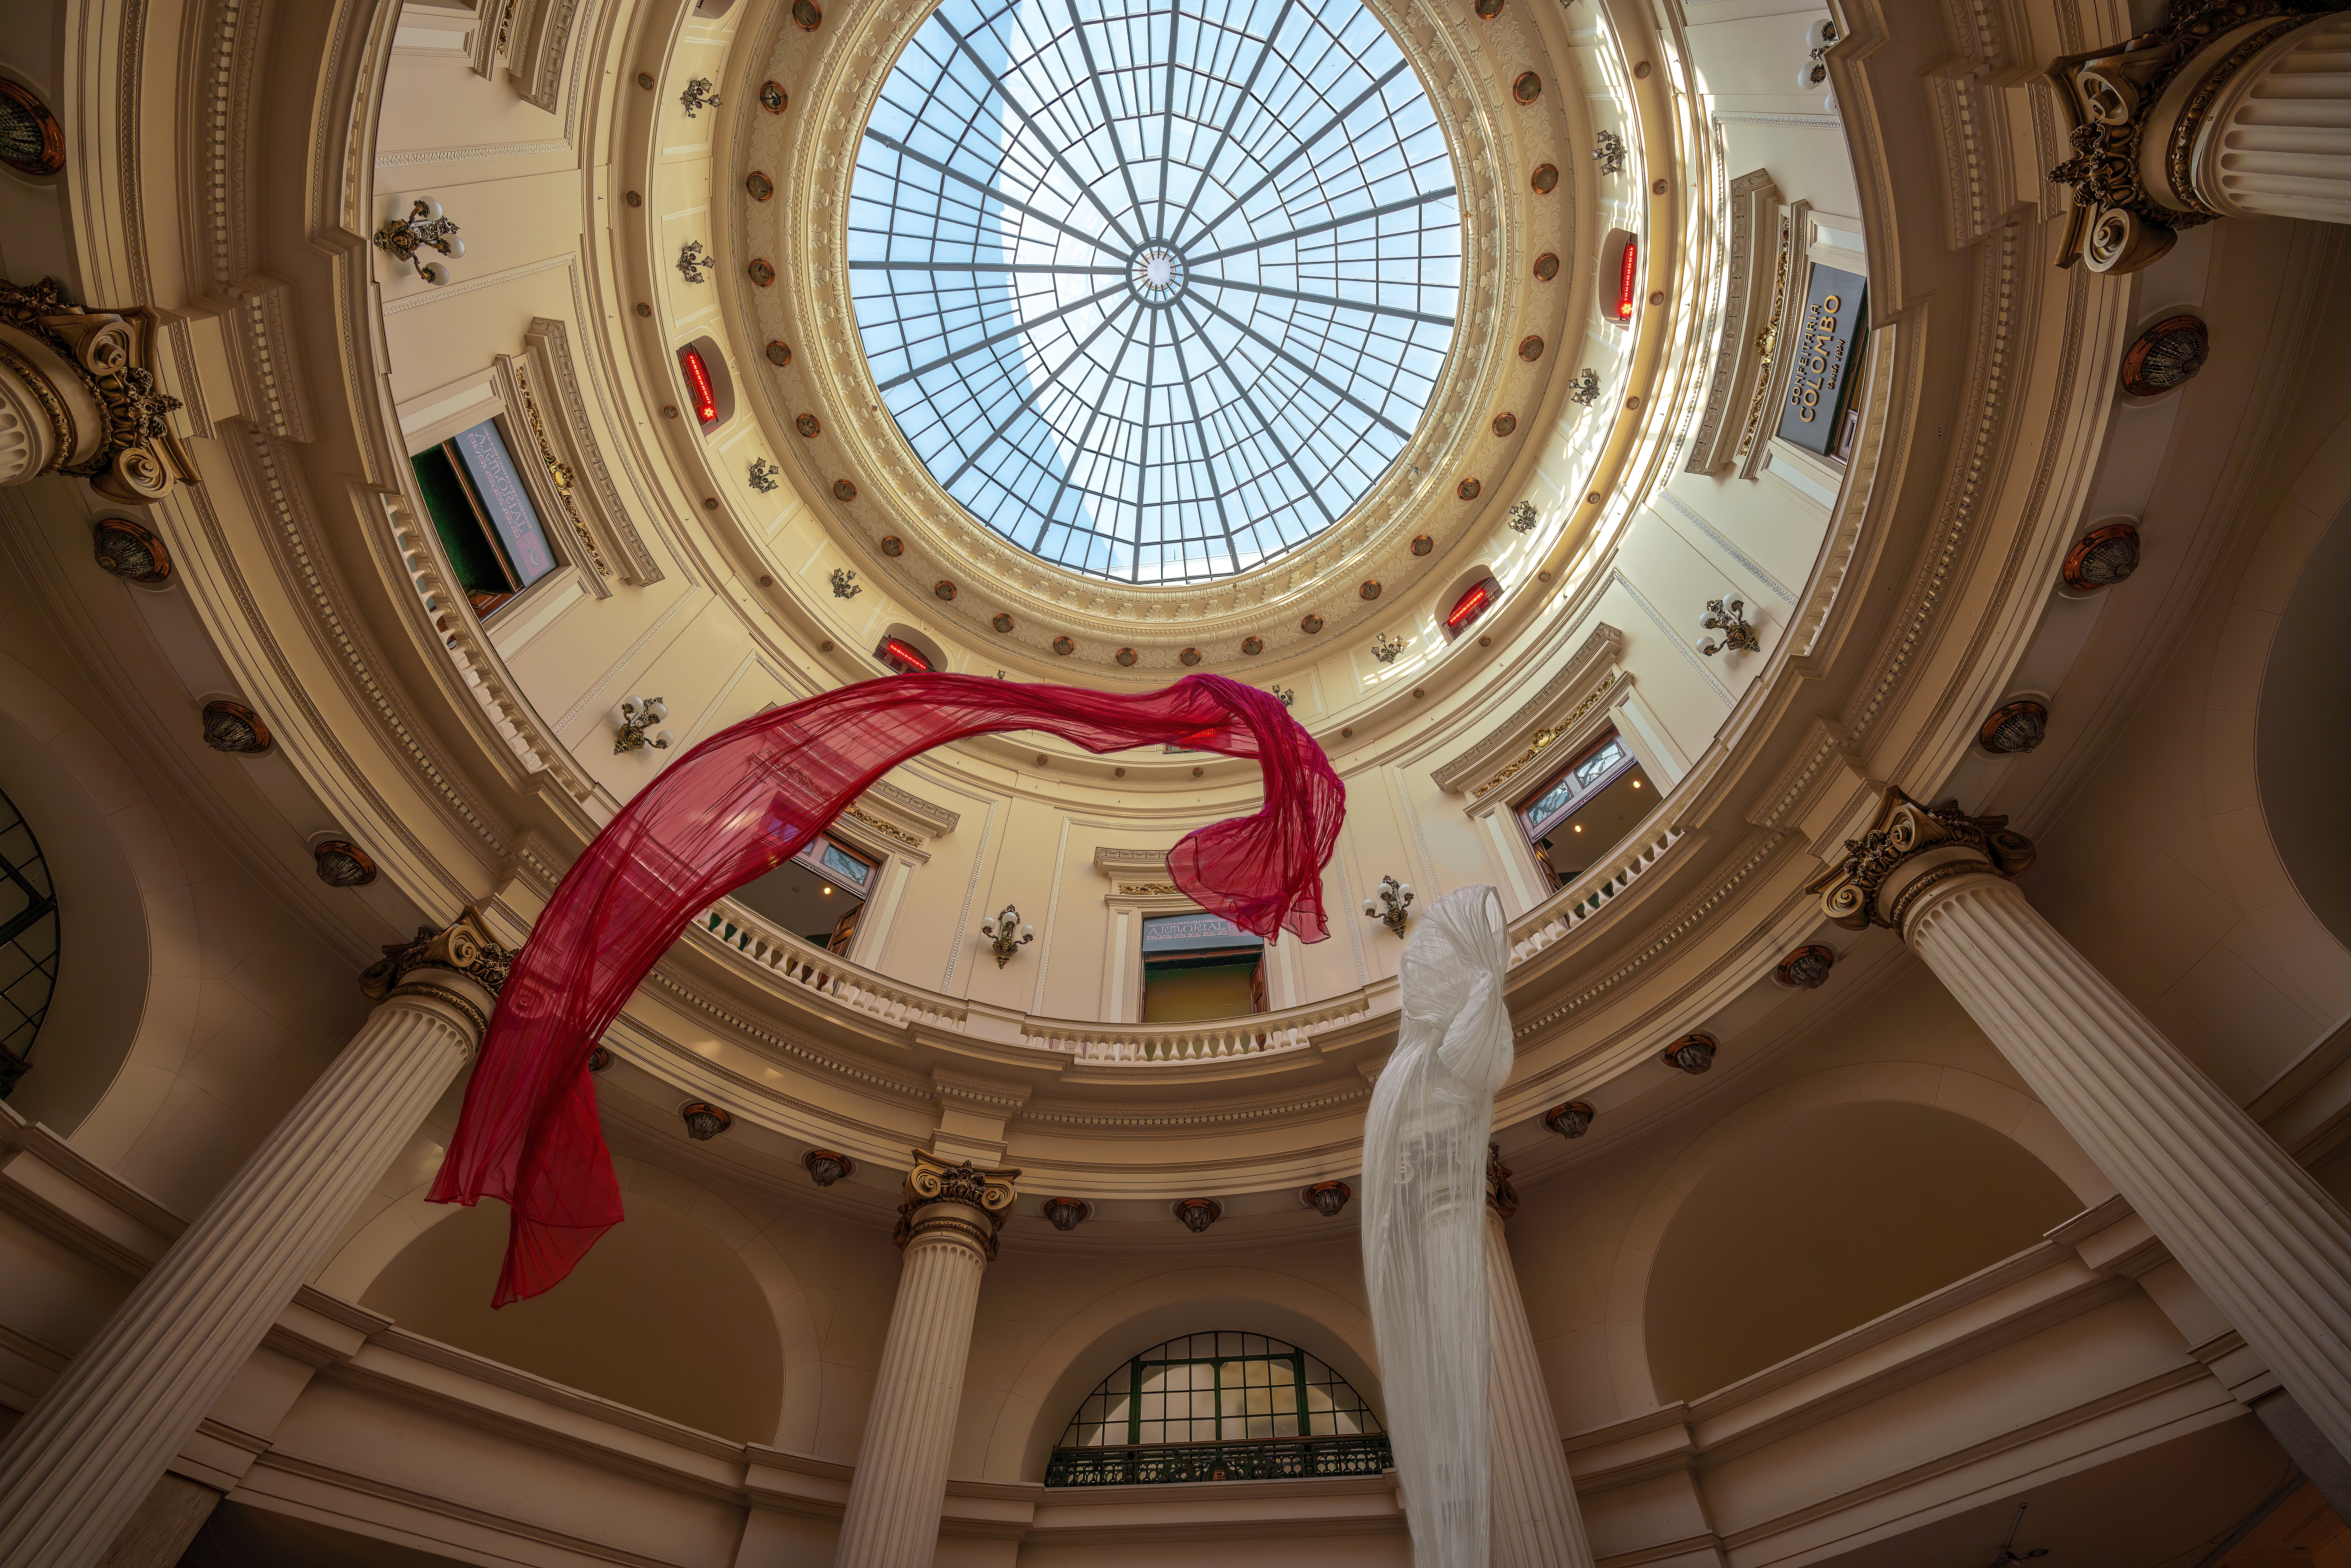 The interior of a circular room, under a dome. Roman-style columns or pillars are spaced around what's visible of the curved wall. At the top of the dome, a circular glass window offers a glimpse of the sky. Two diaphanous pieces of cloth appear to be floating down from the ceiling. Image: Diego Grandi/Shutterstock.